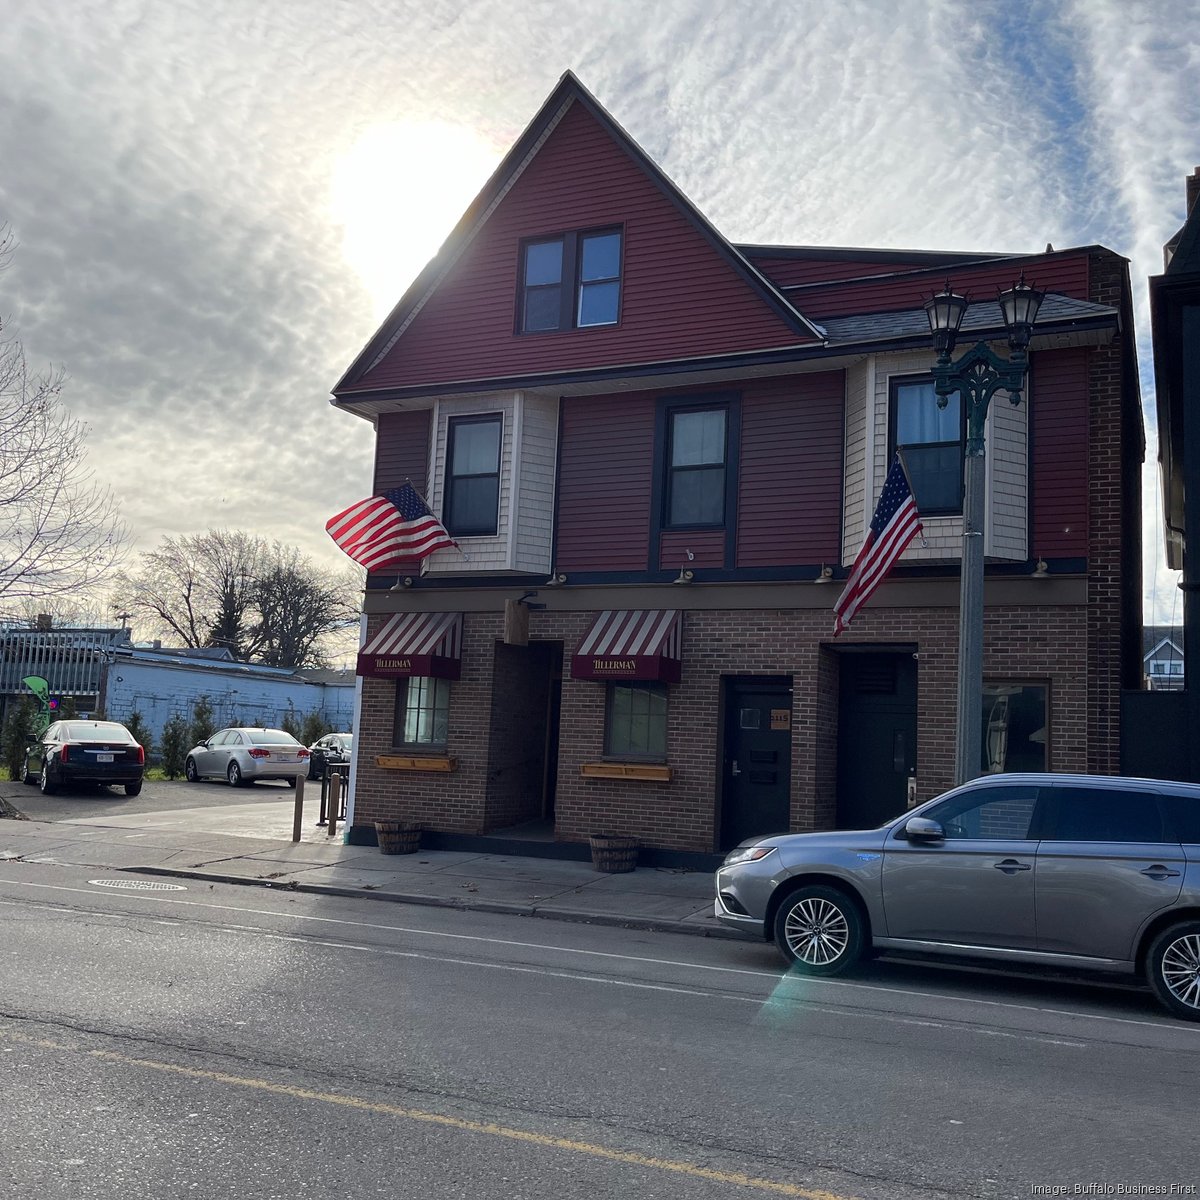 Dog & Pony Saloon planned for South Buffalo site - Buffalo Business First